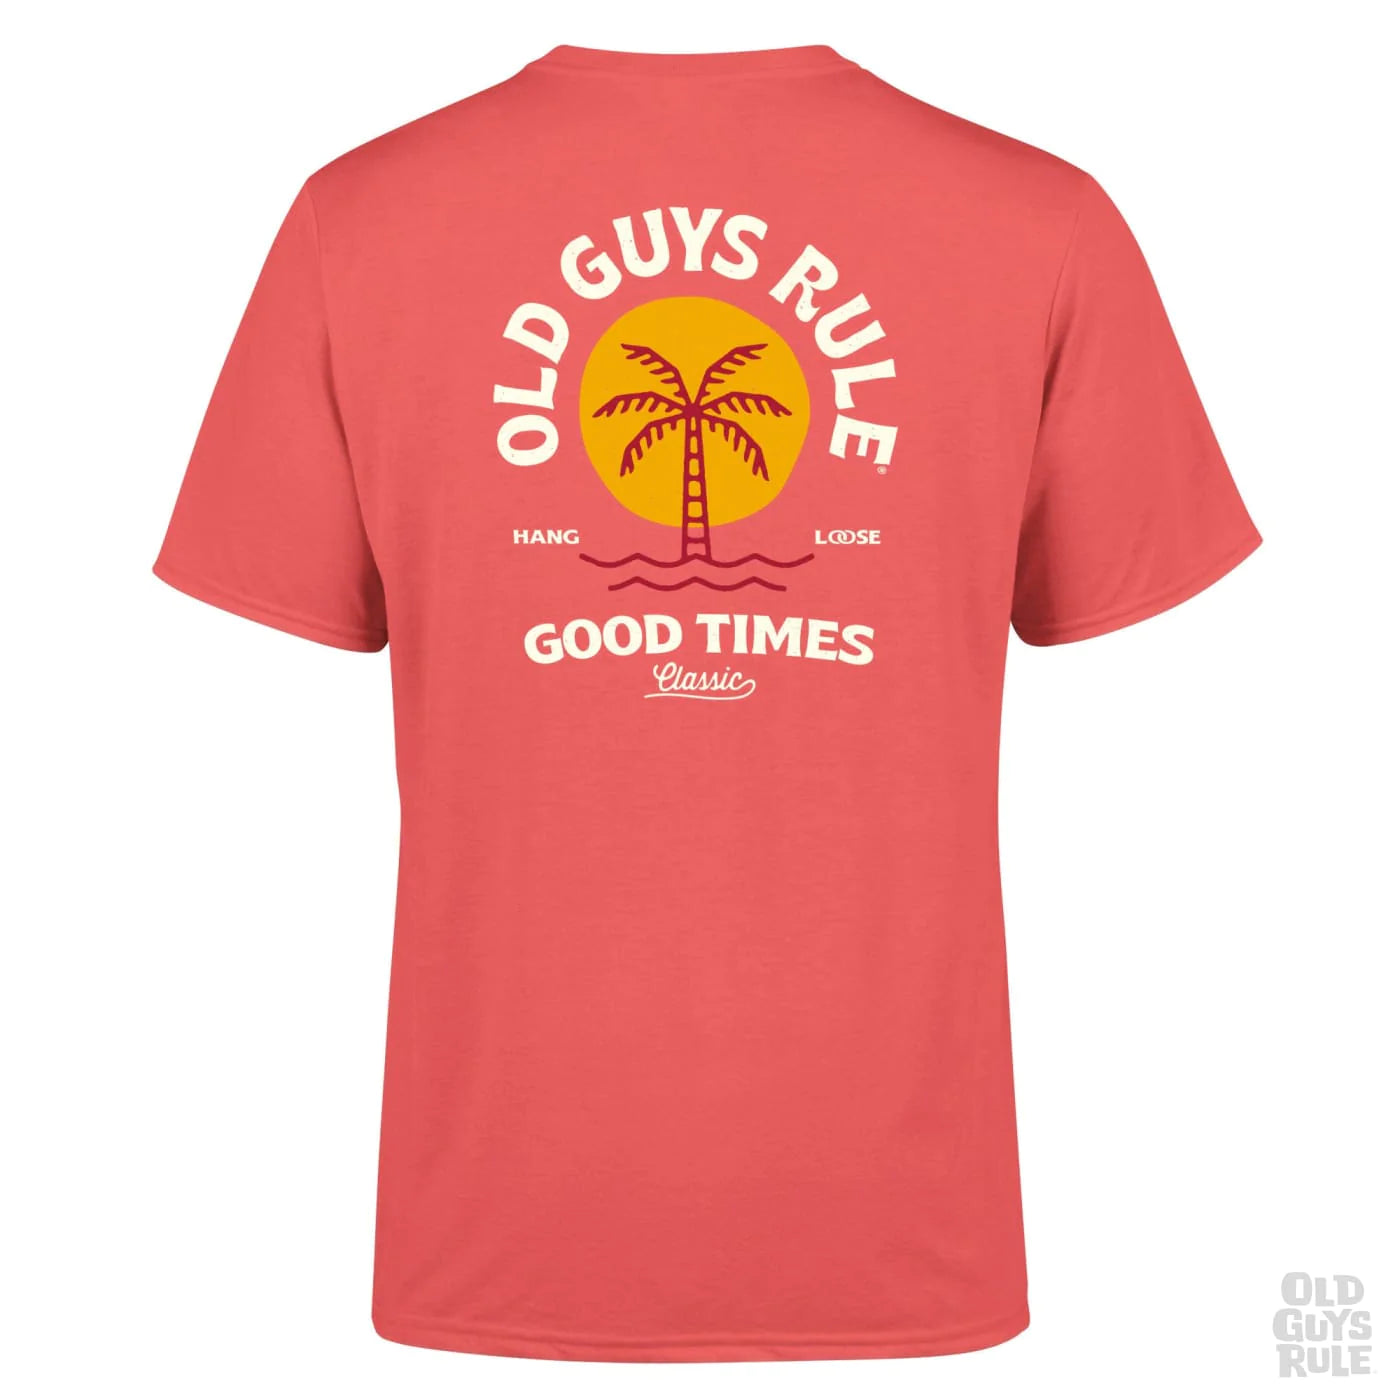 OLD GUYS RULE 'GOOD TIMES' T-SHIRT - CORAL SILK